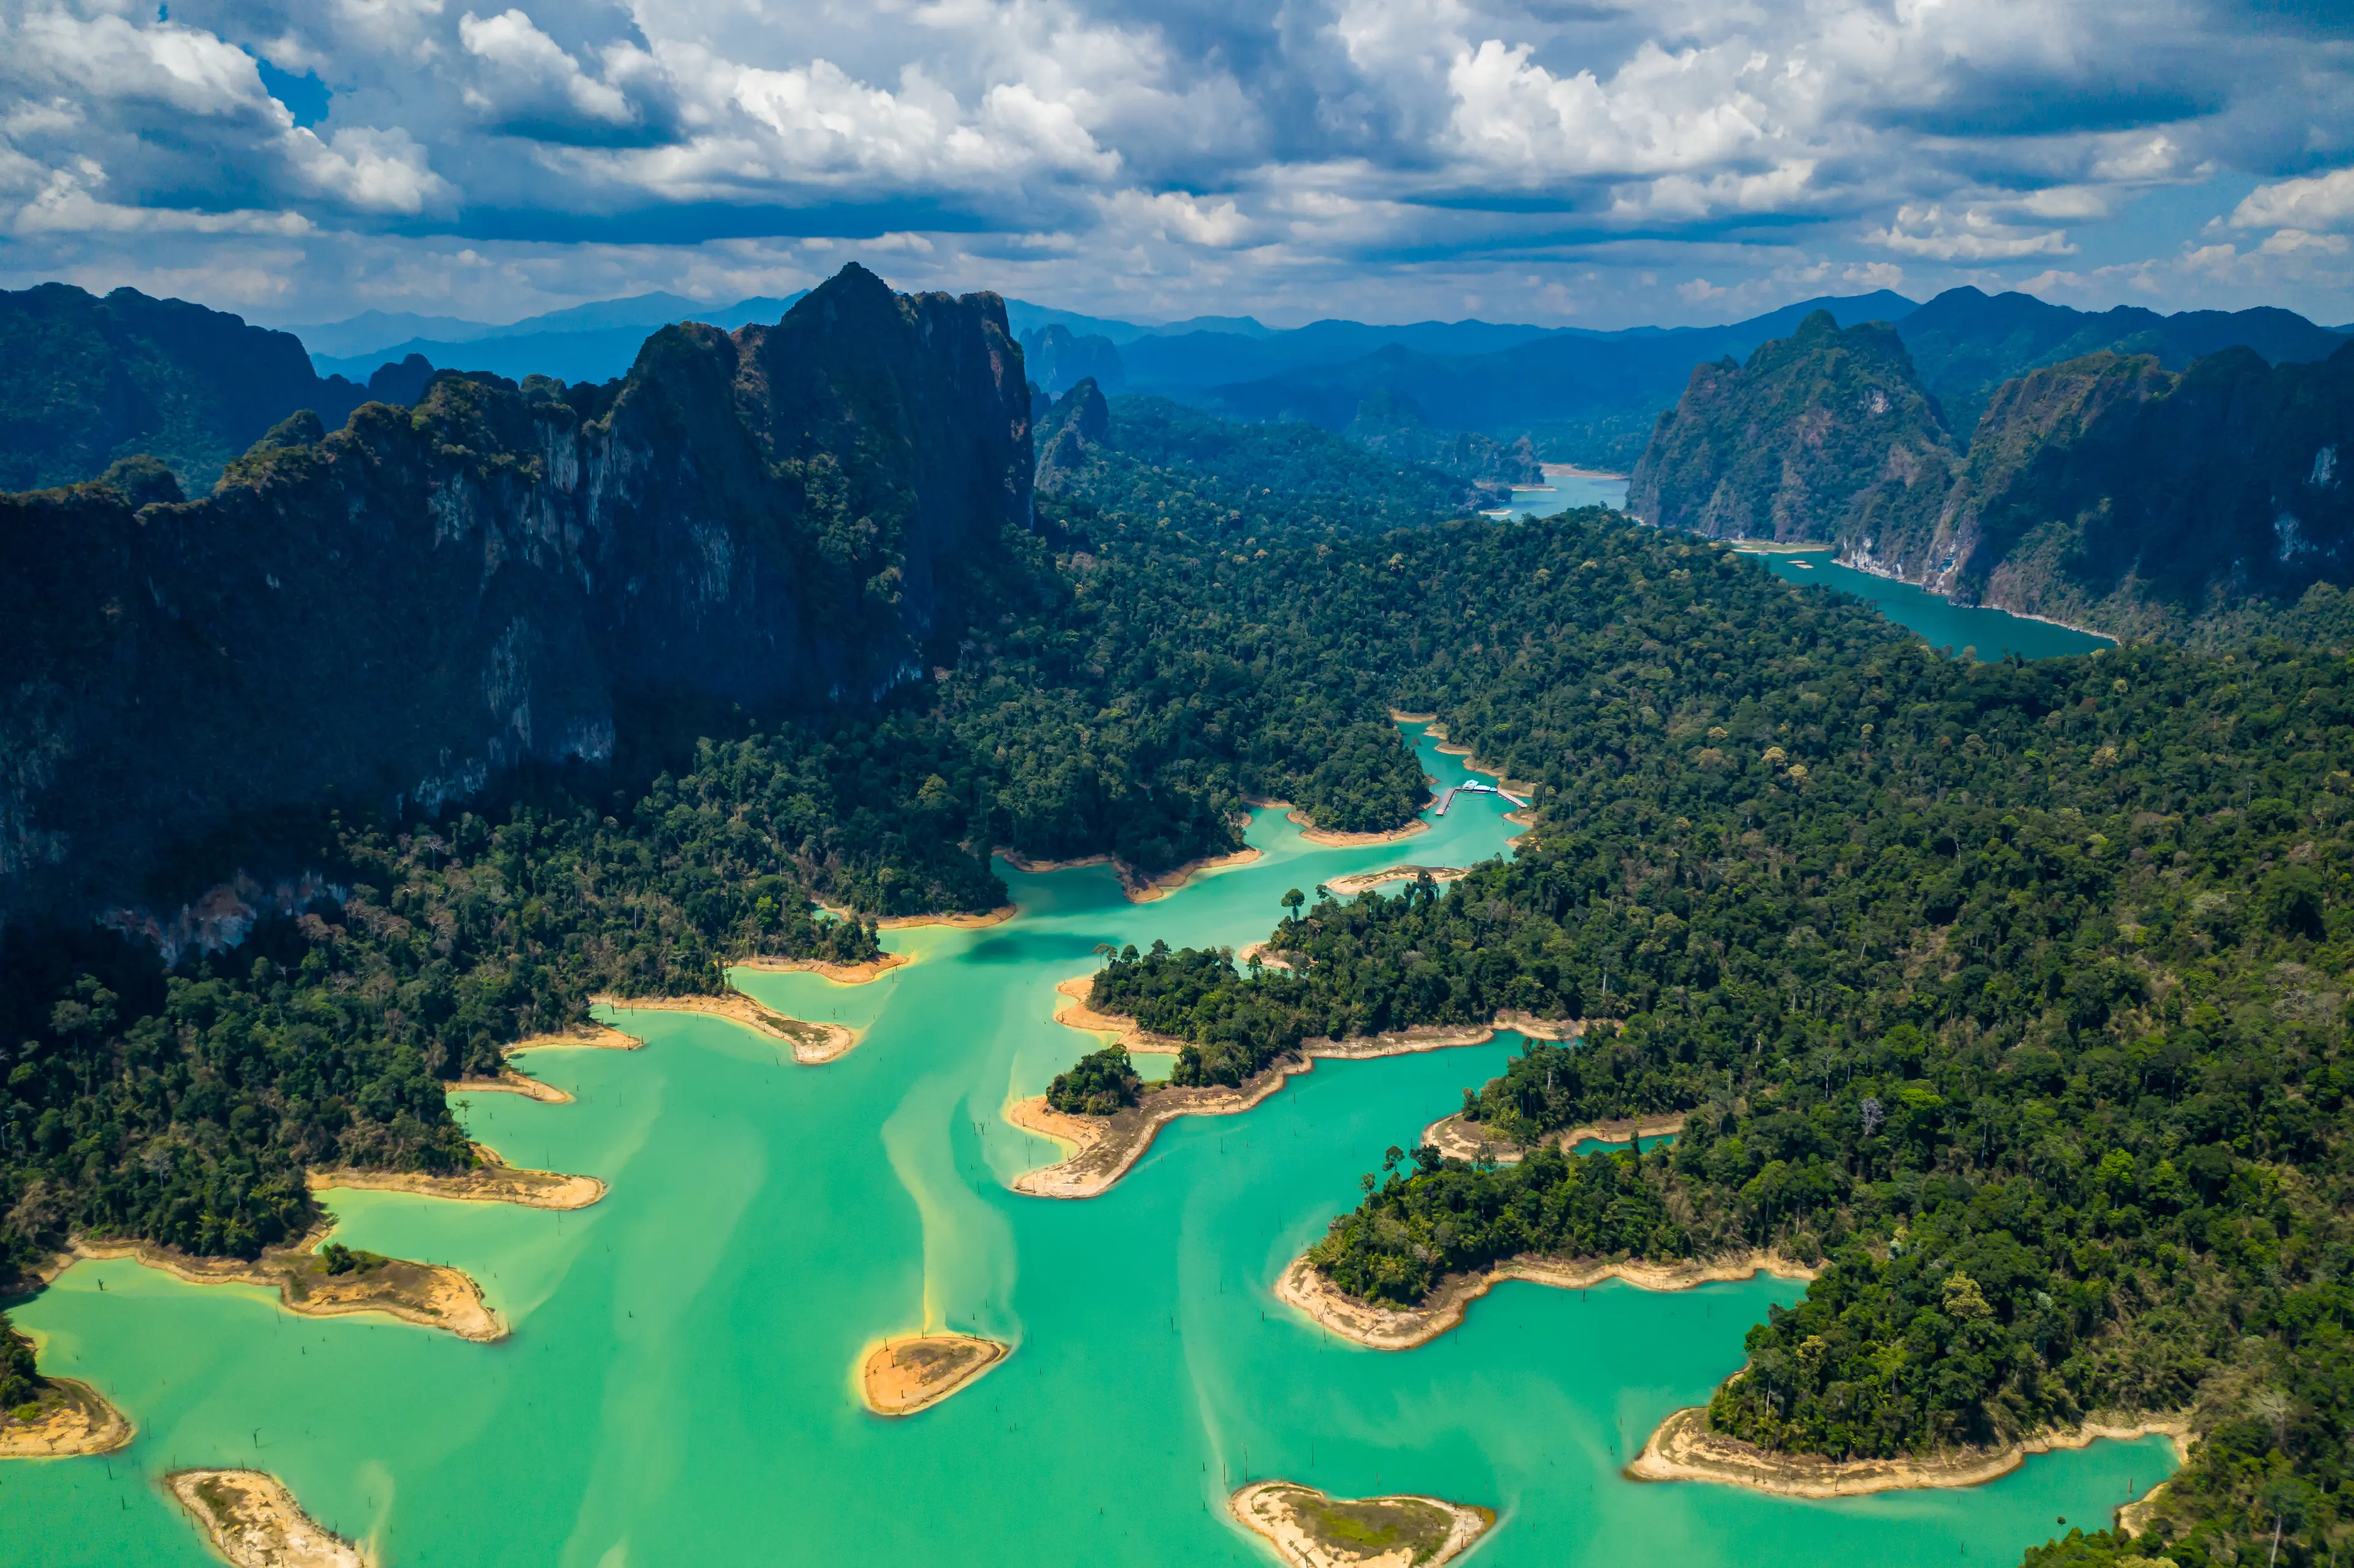 1-Day Local Adventure and Sightseeing in Khao Sok, Thailand